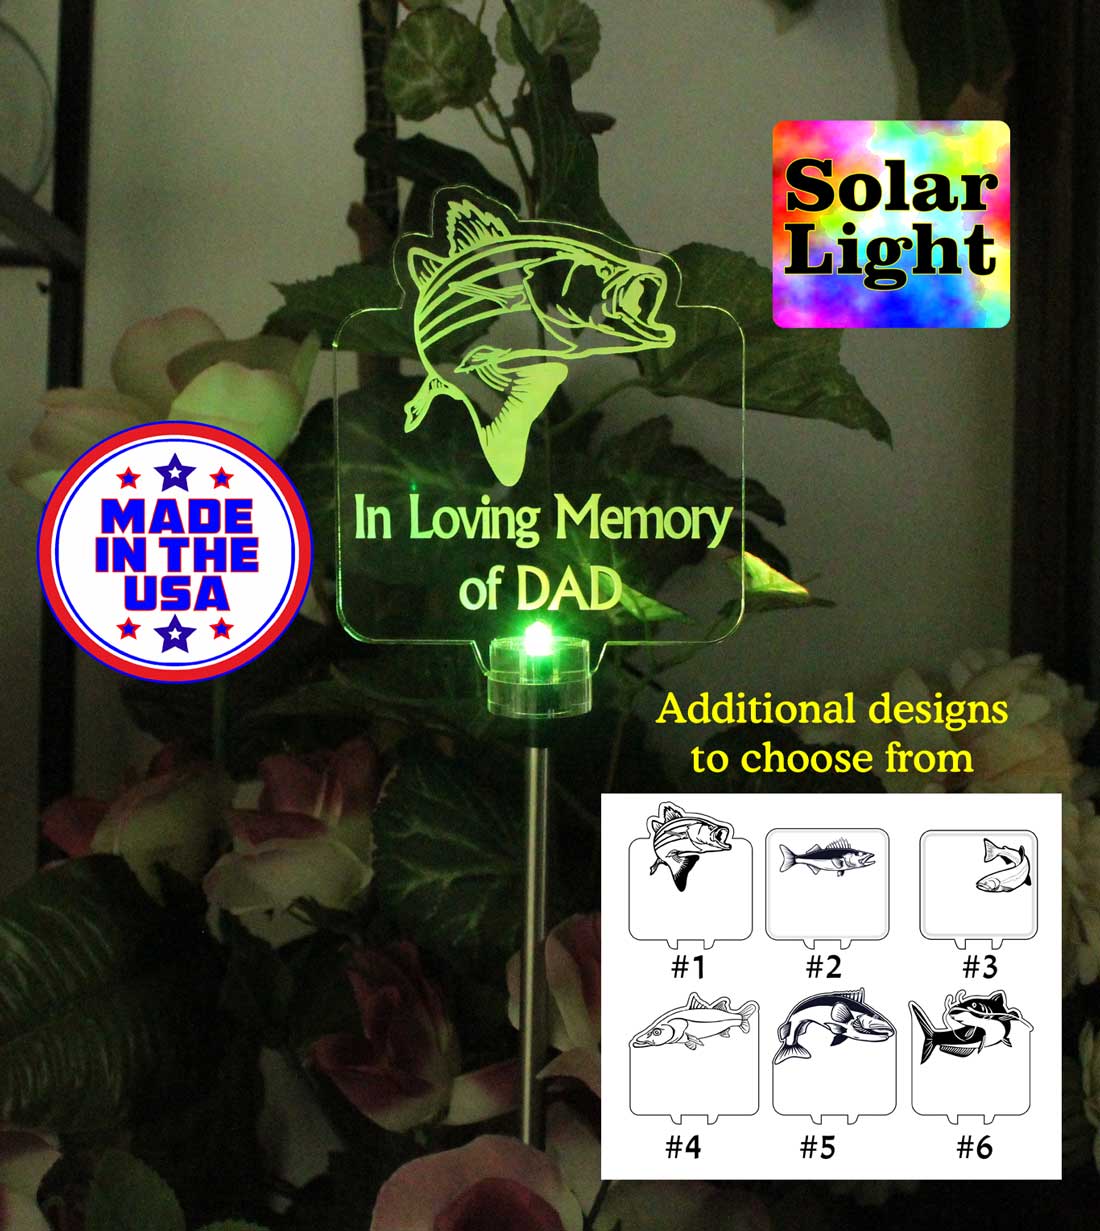 Personalized Solar Light - Wide mouth bass fish